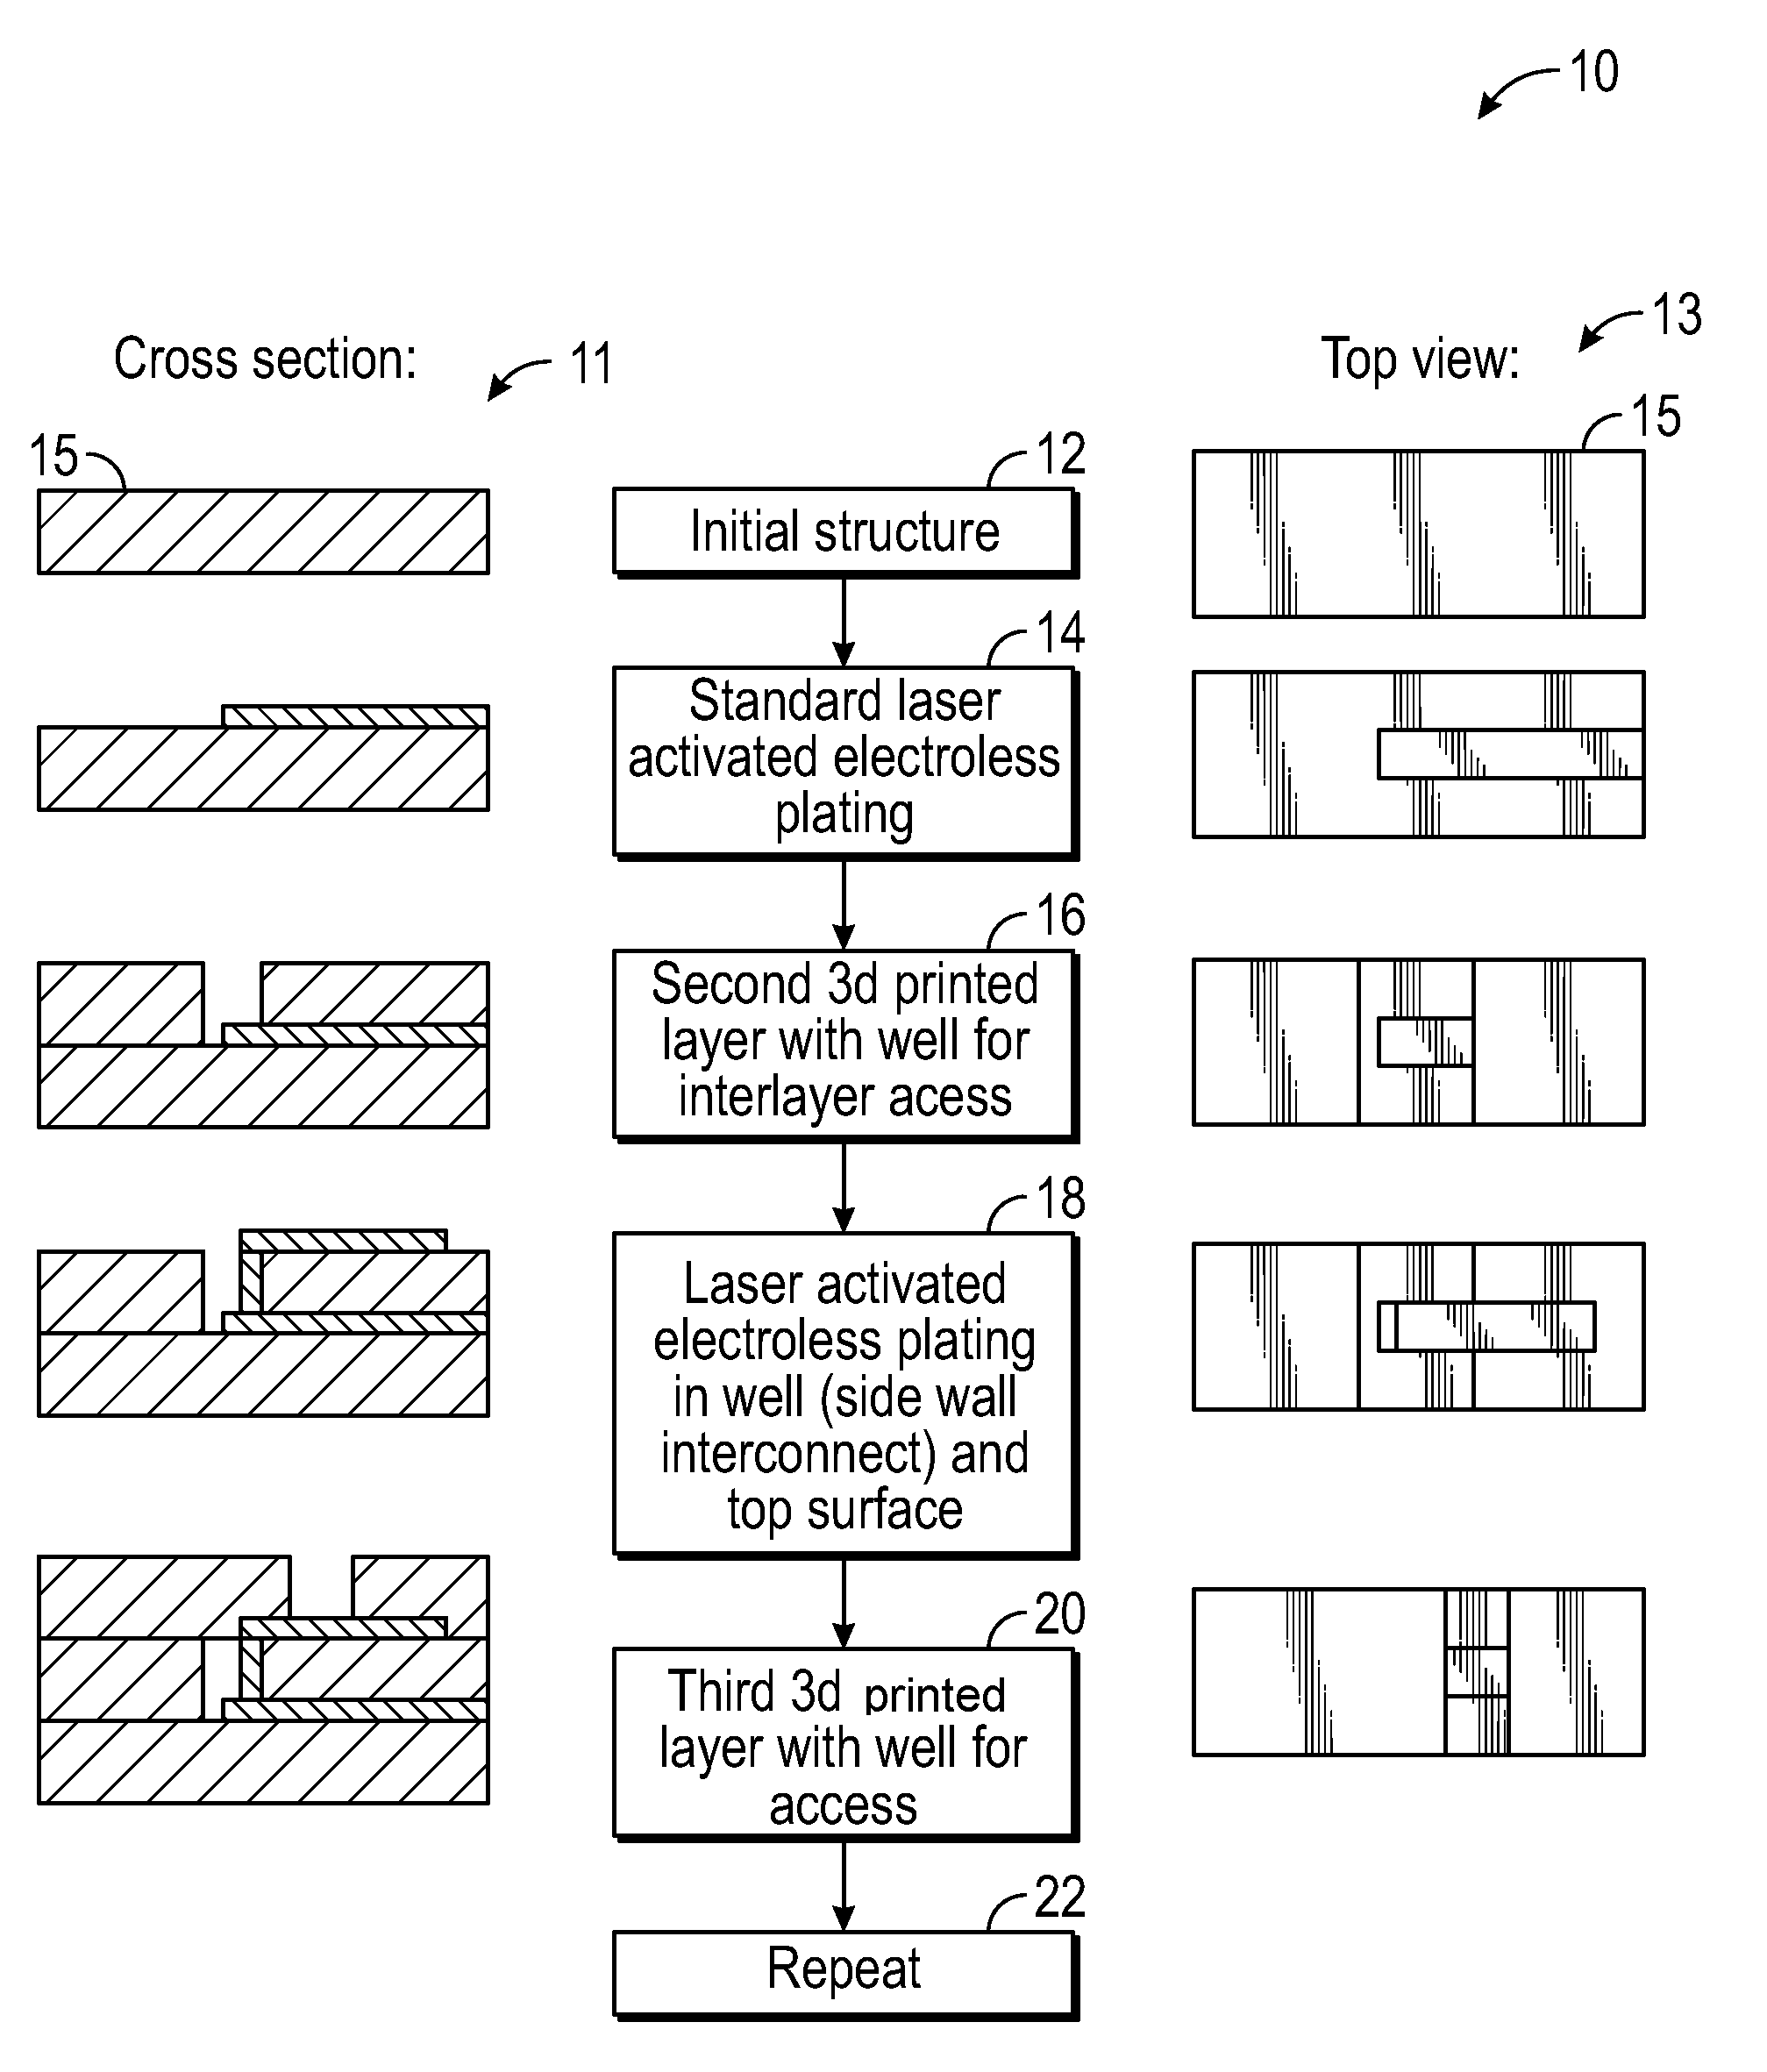 Multi-layered 3D printed laser direct structuring for electrical interconnect and antennas